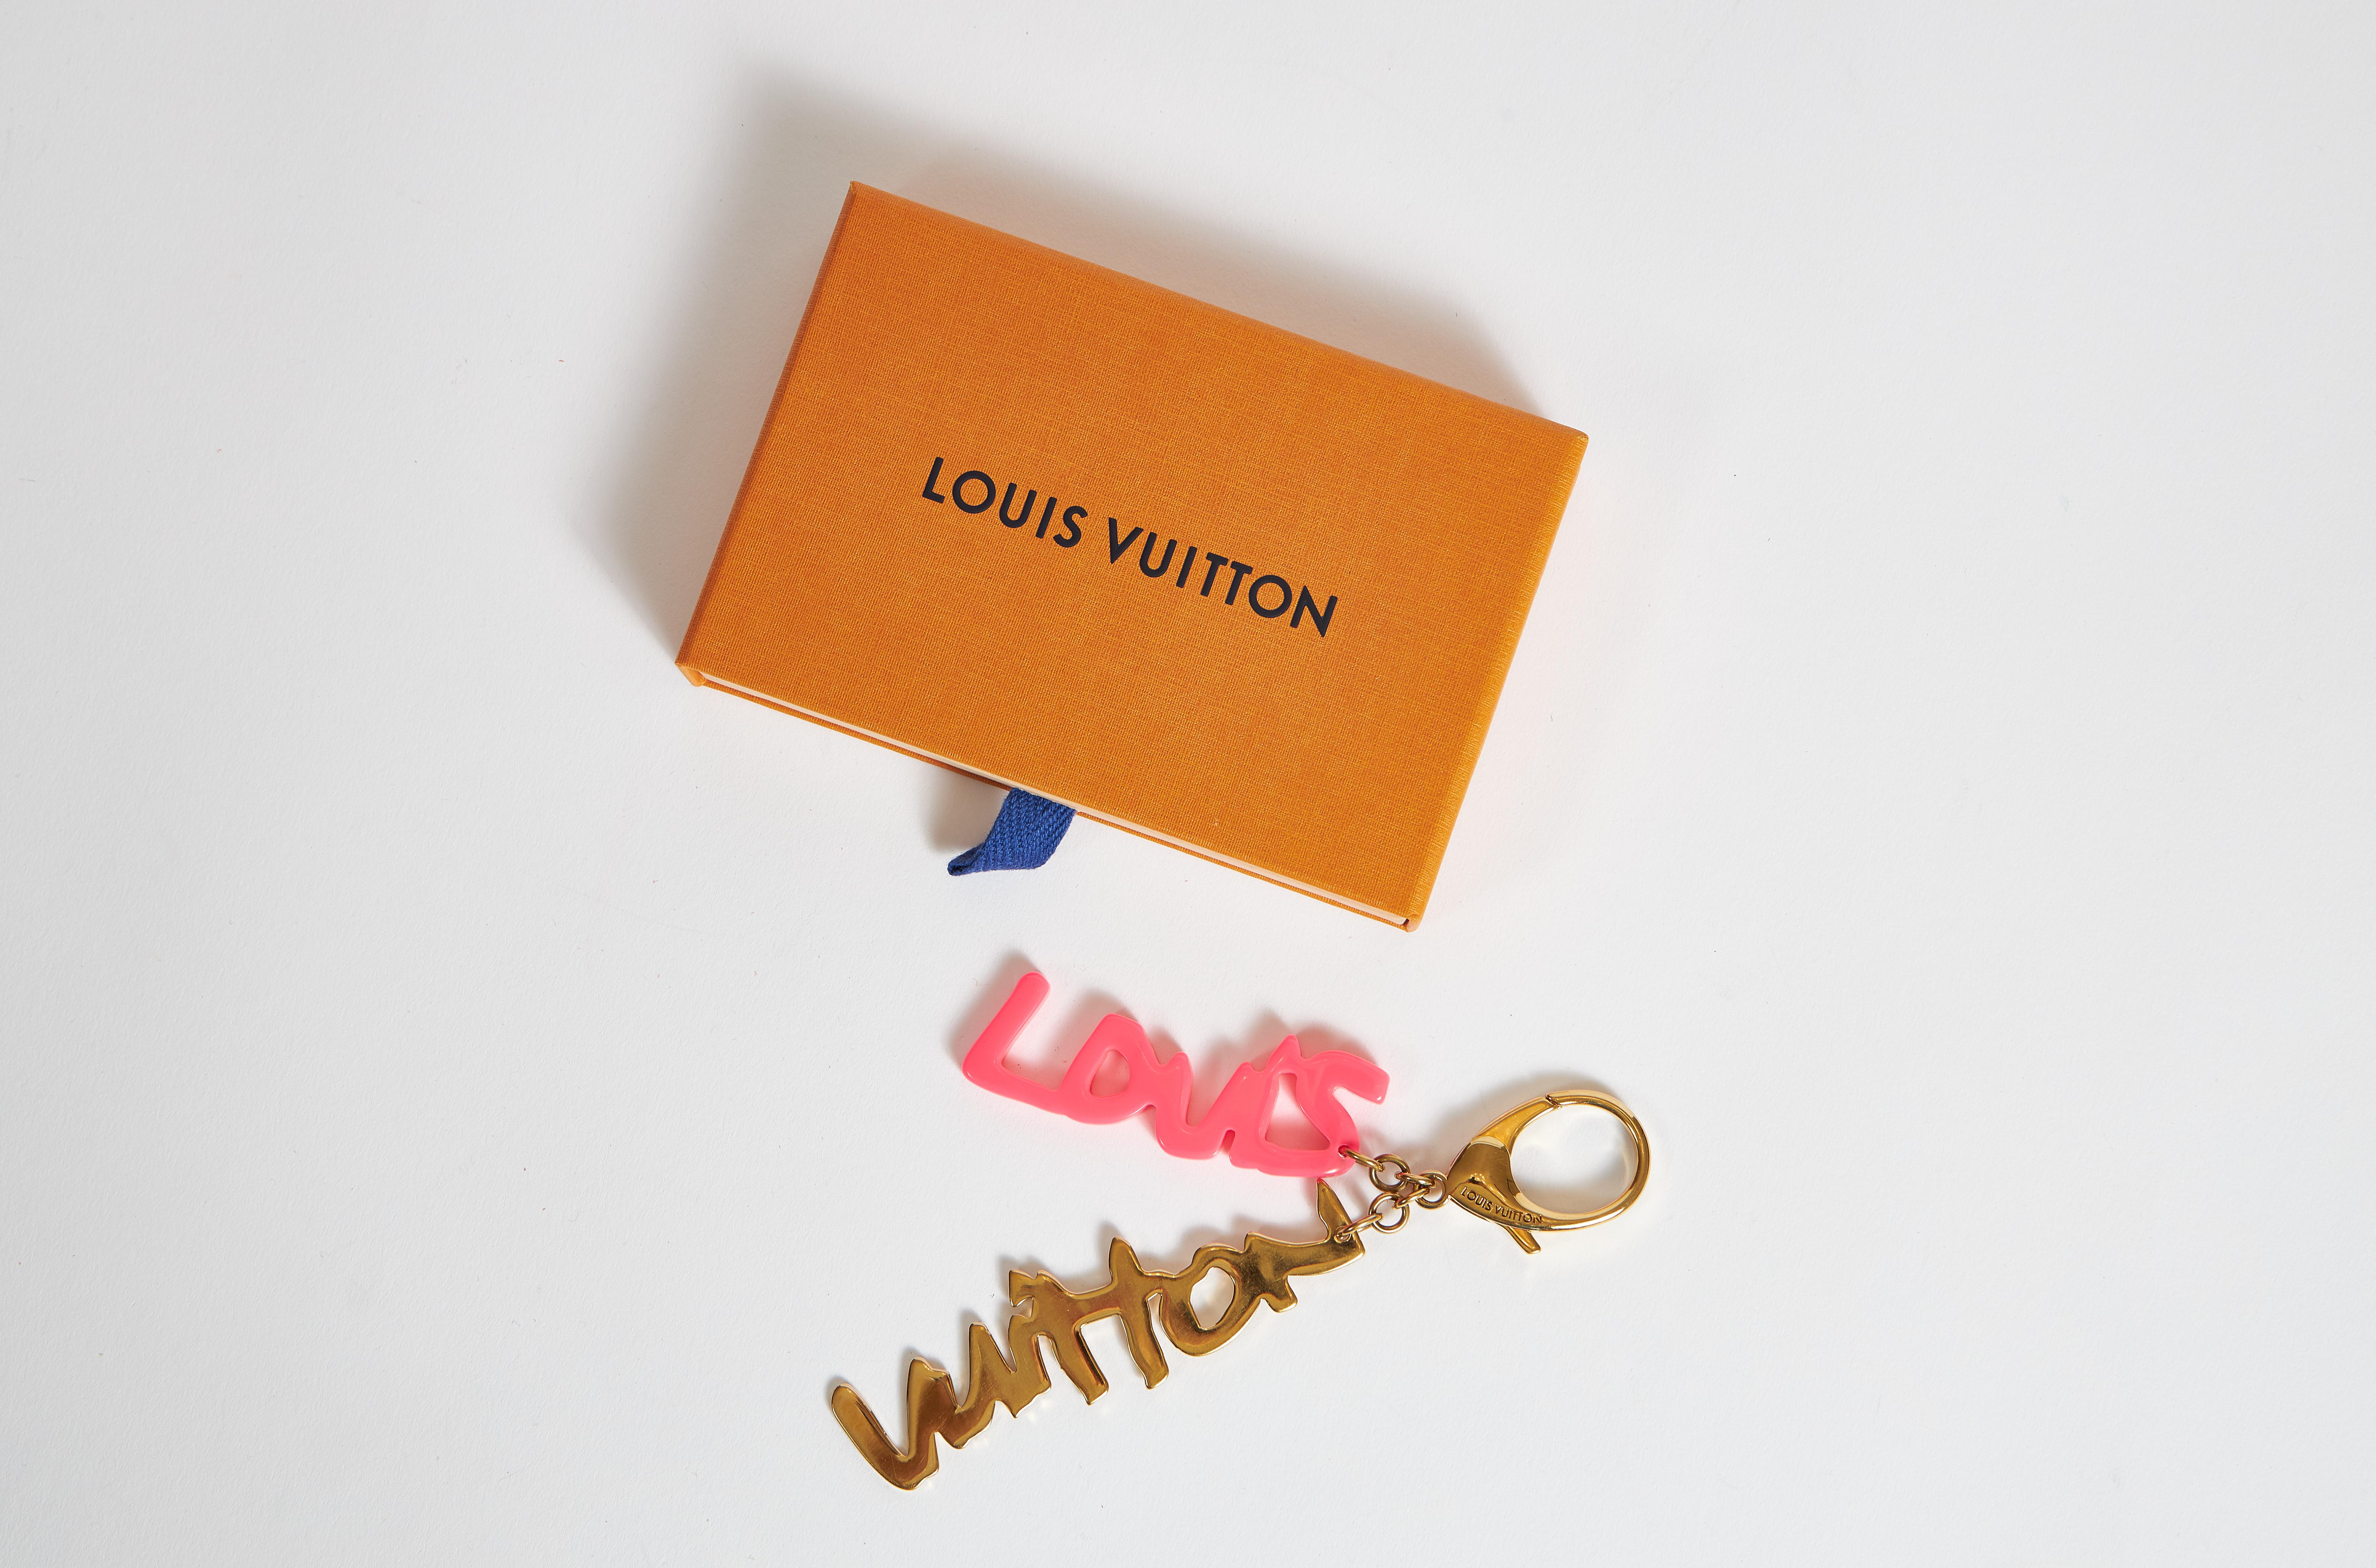 Louis Vuitton writing pink and gold tone bag charm, key chain. Comes with original dust cover and box.